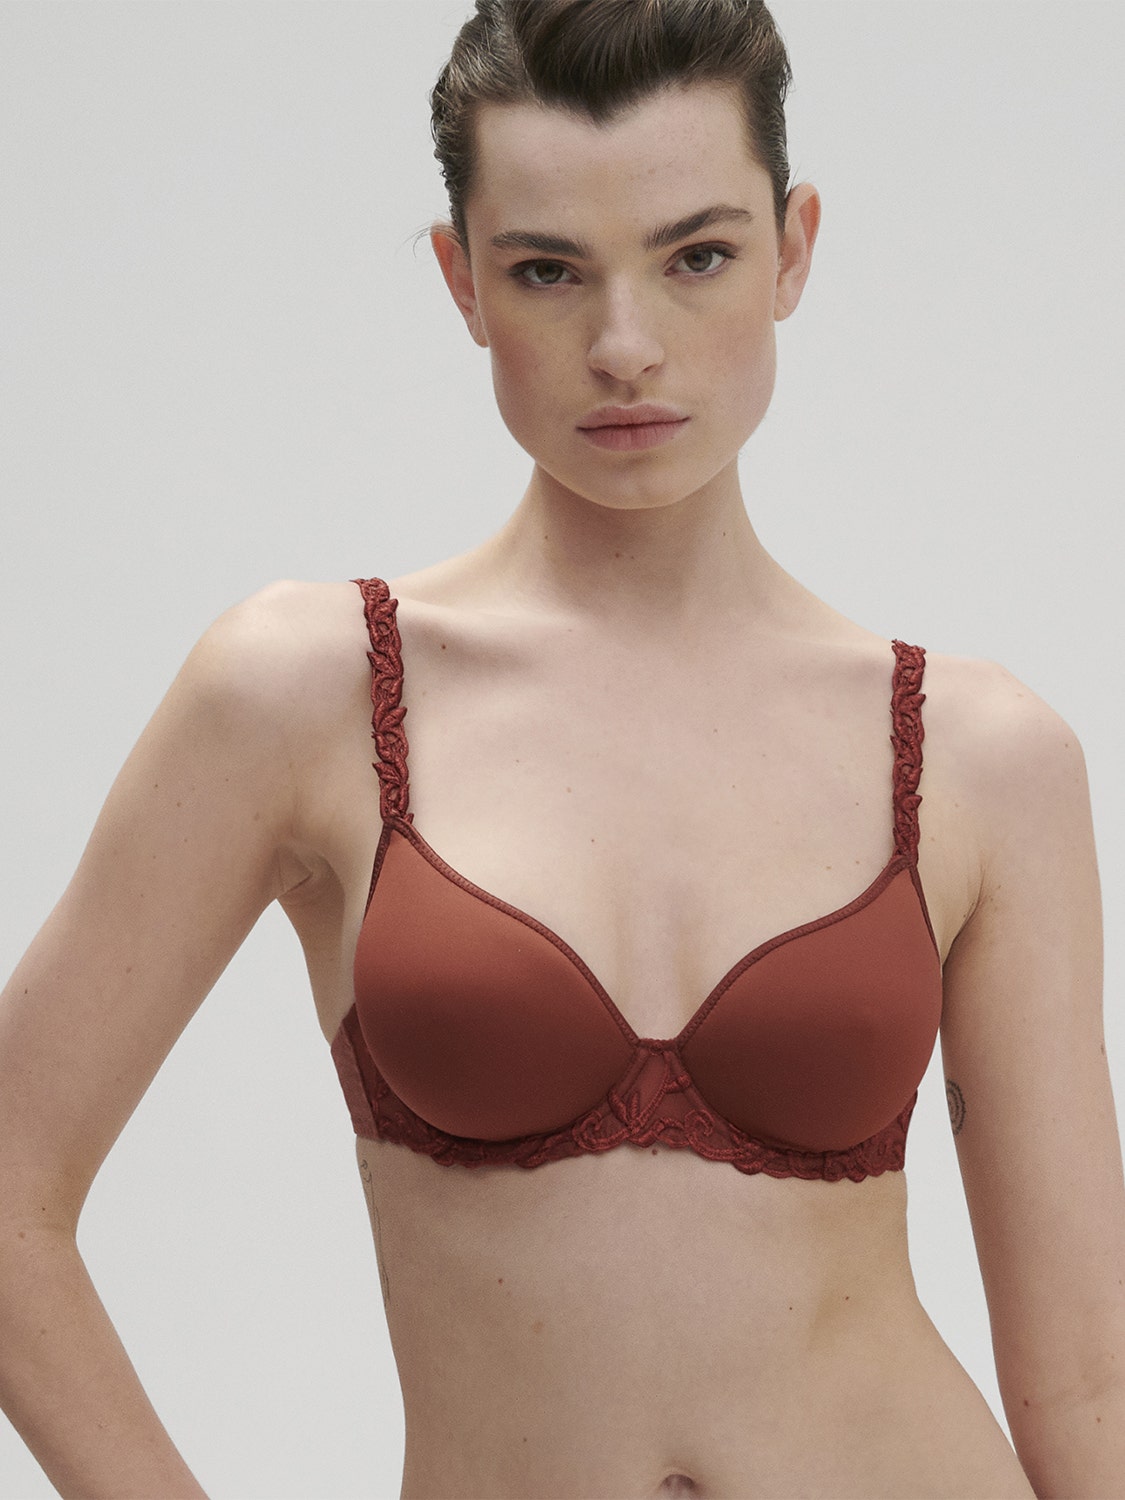 Simone Perele Promesse Boyshort Panty in Anthracite FINAL SALE (40% Off) -  Busted Bra Shop